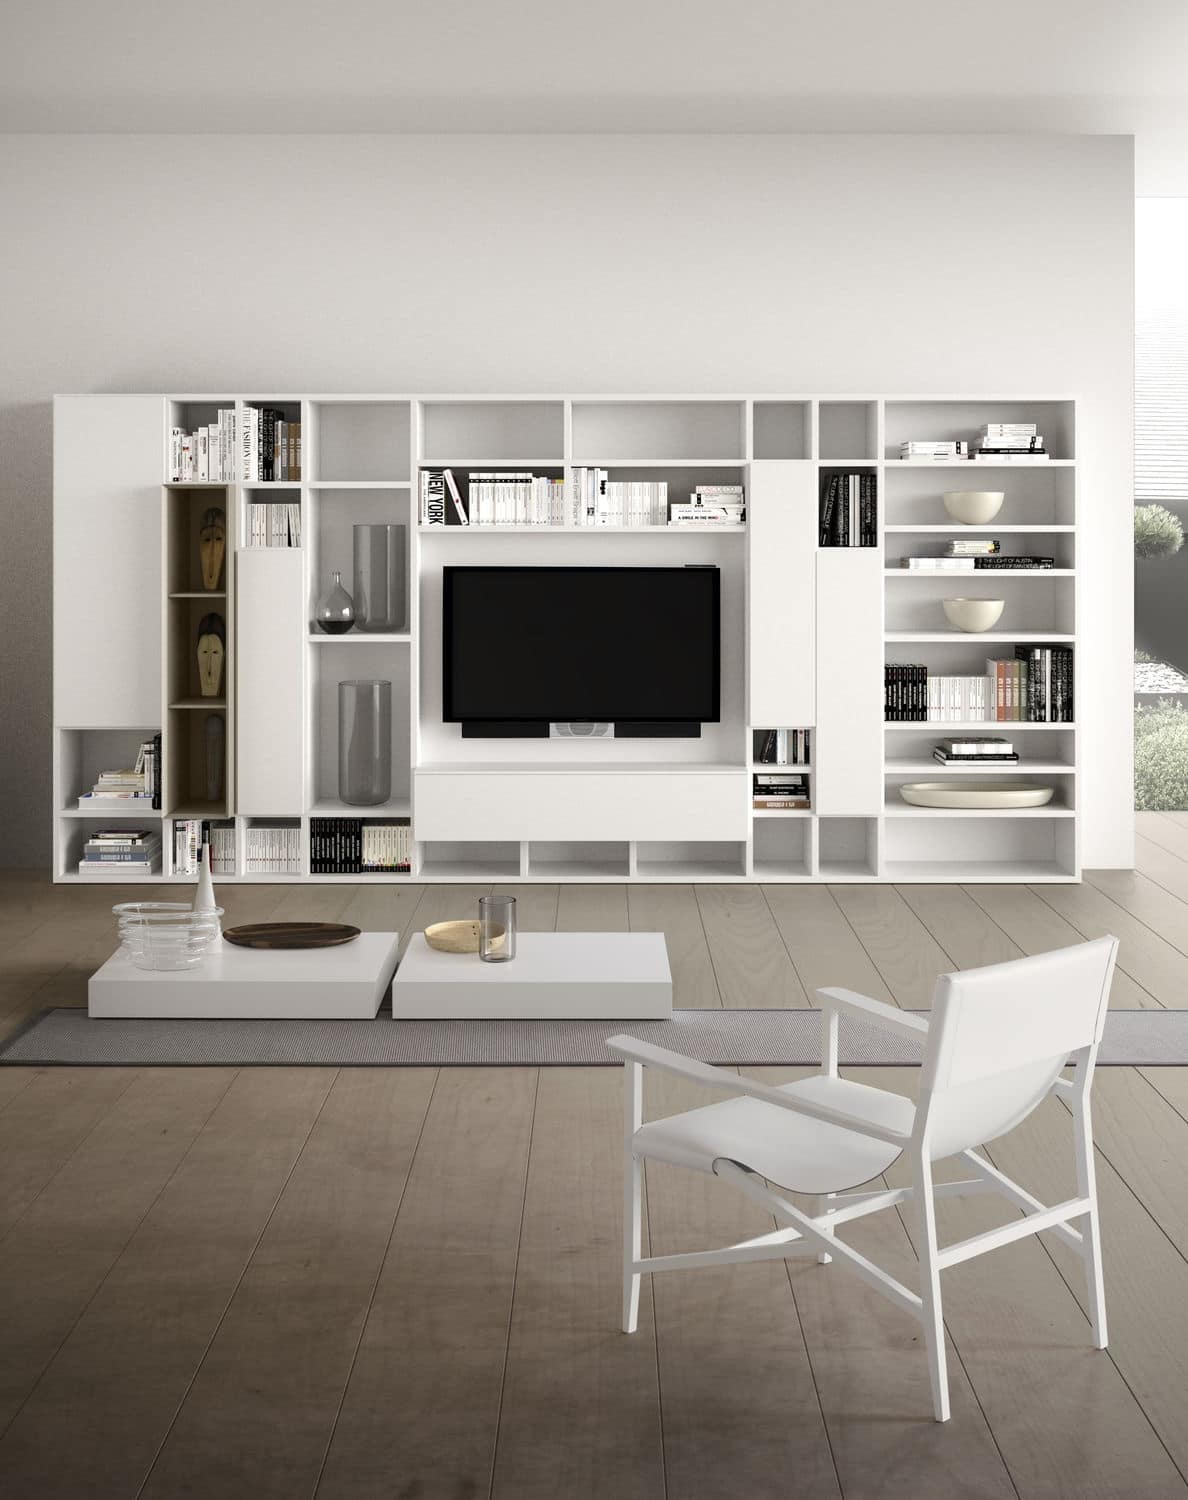 Spazioteca SP014, Modular system for the modern living room, in wood